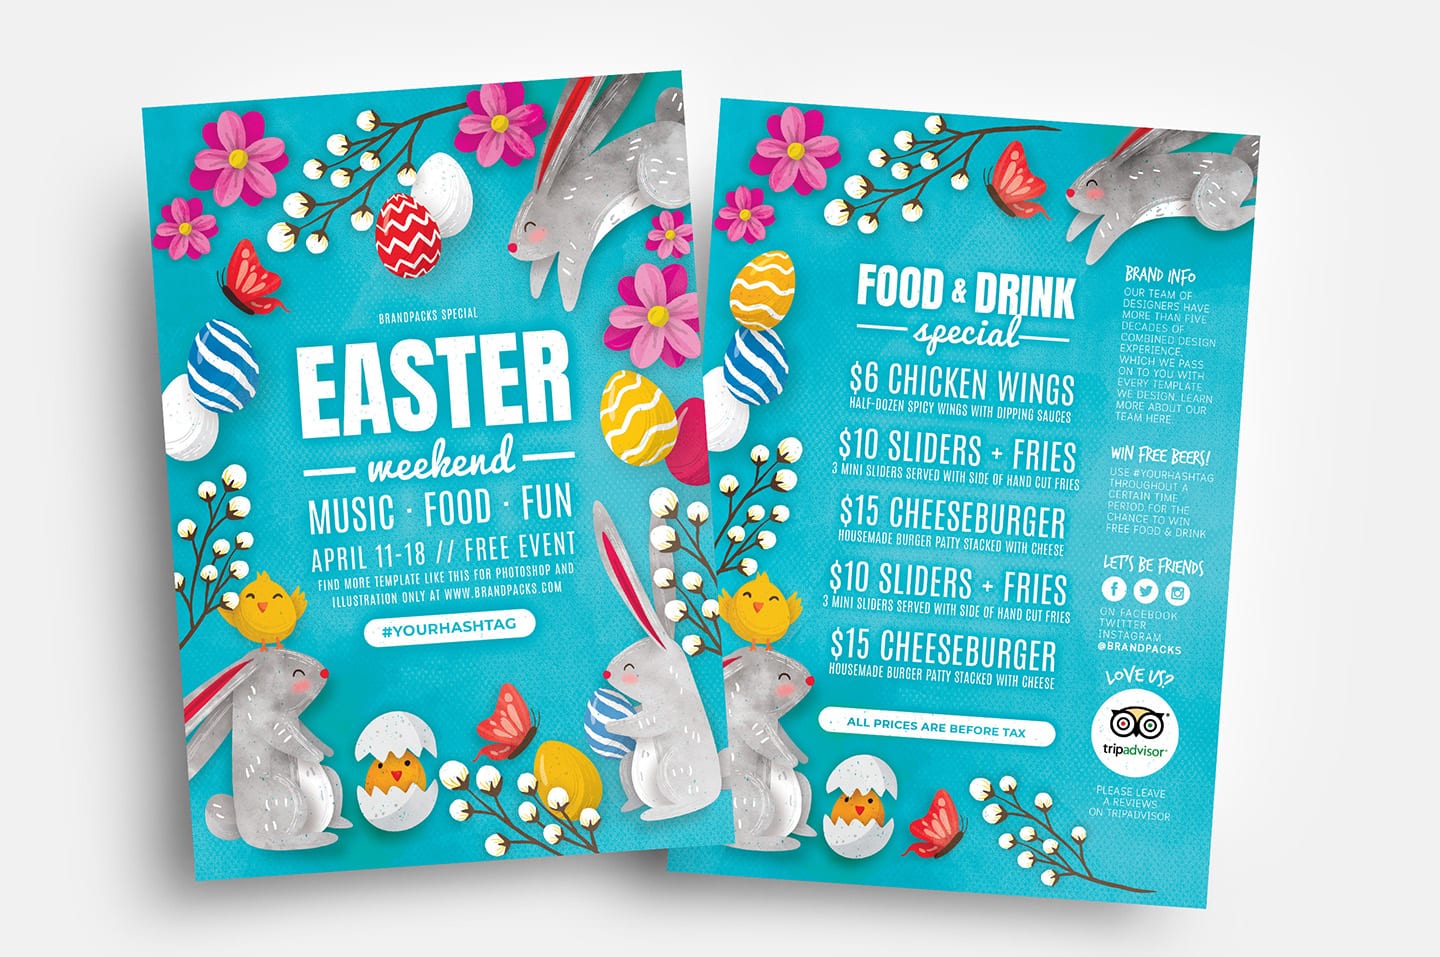 Easter Flyer Templates